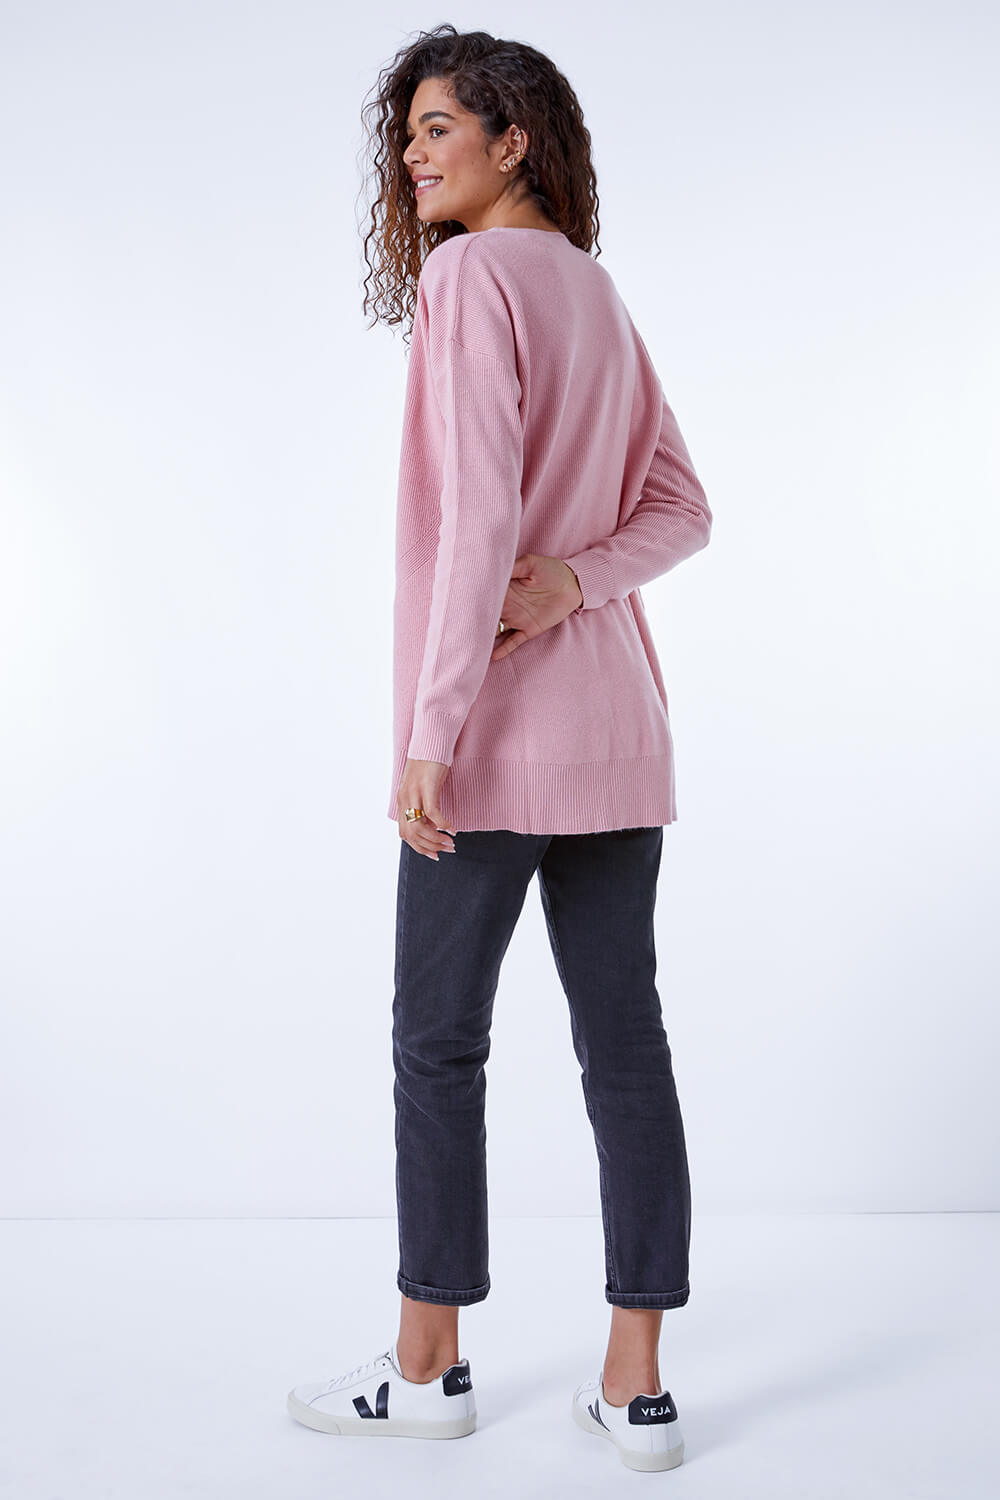 PINK Longline Buttoned Cardigan, Image 3 of 5